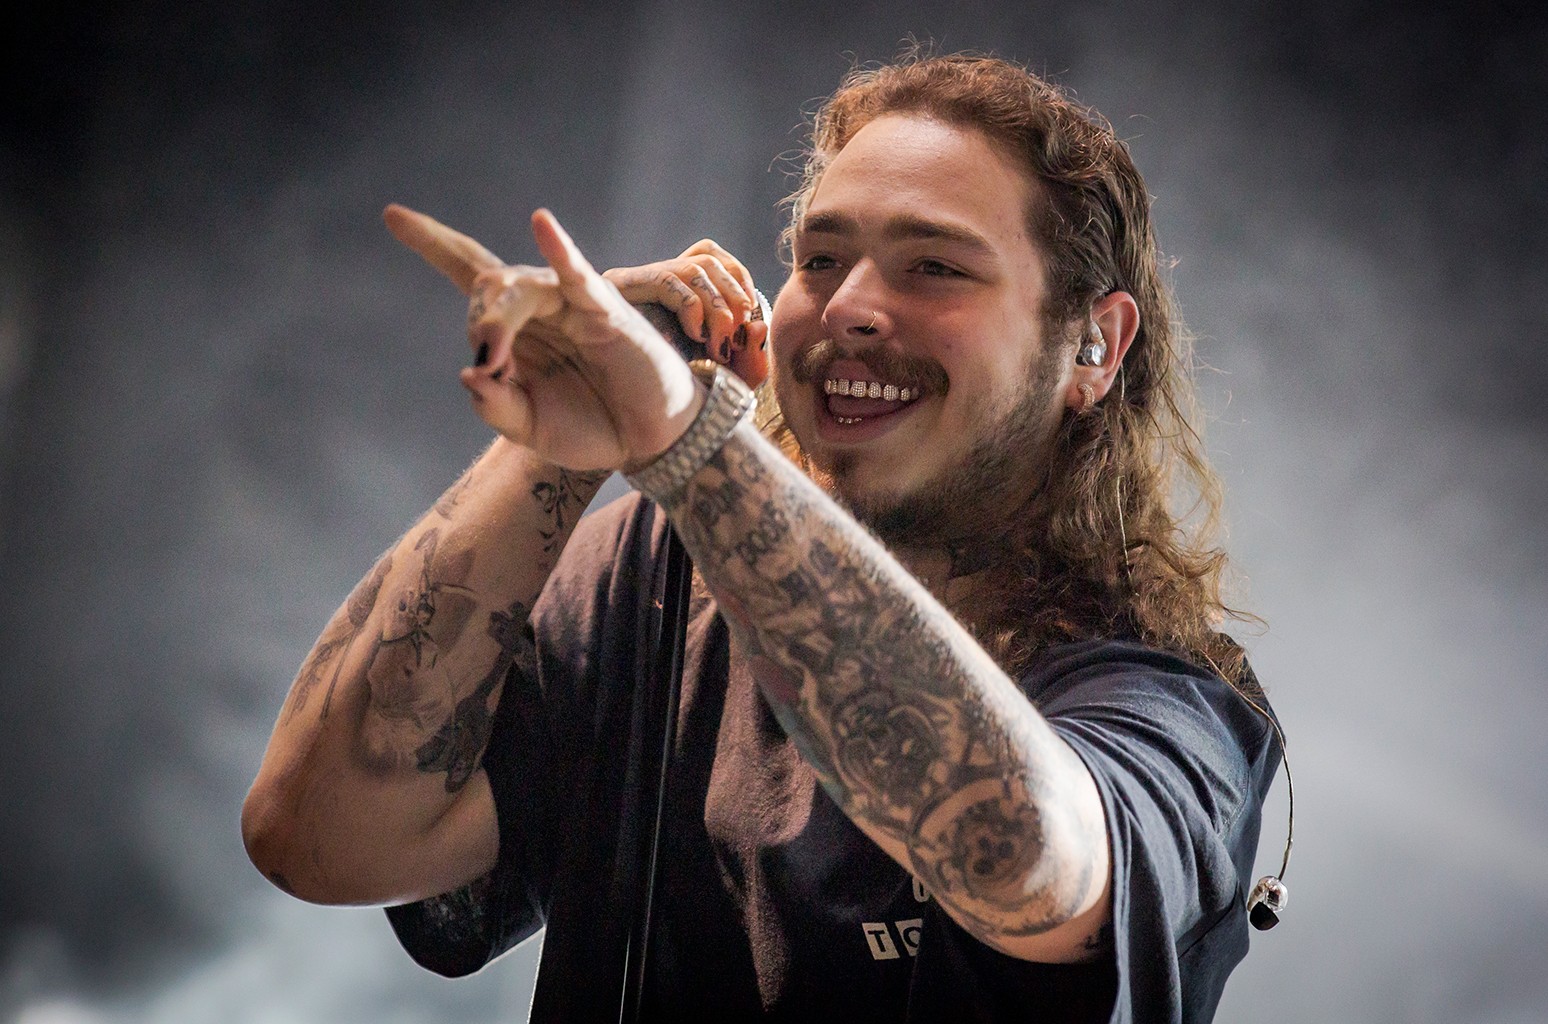 Post Malone Pictures Wallpaper